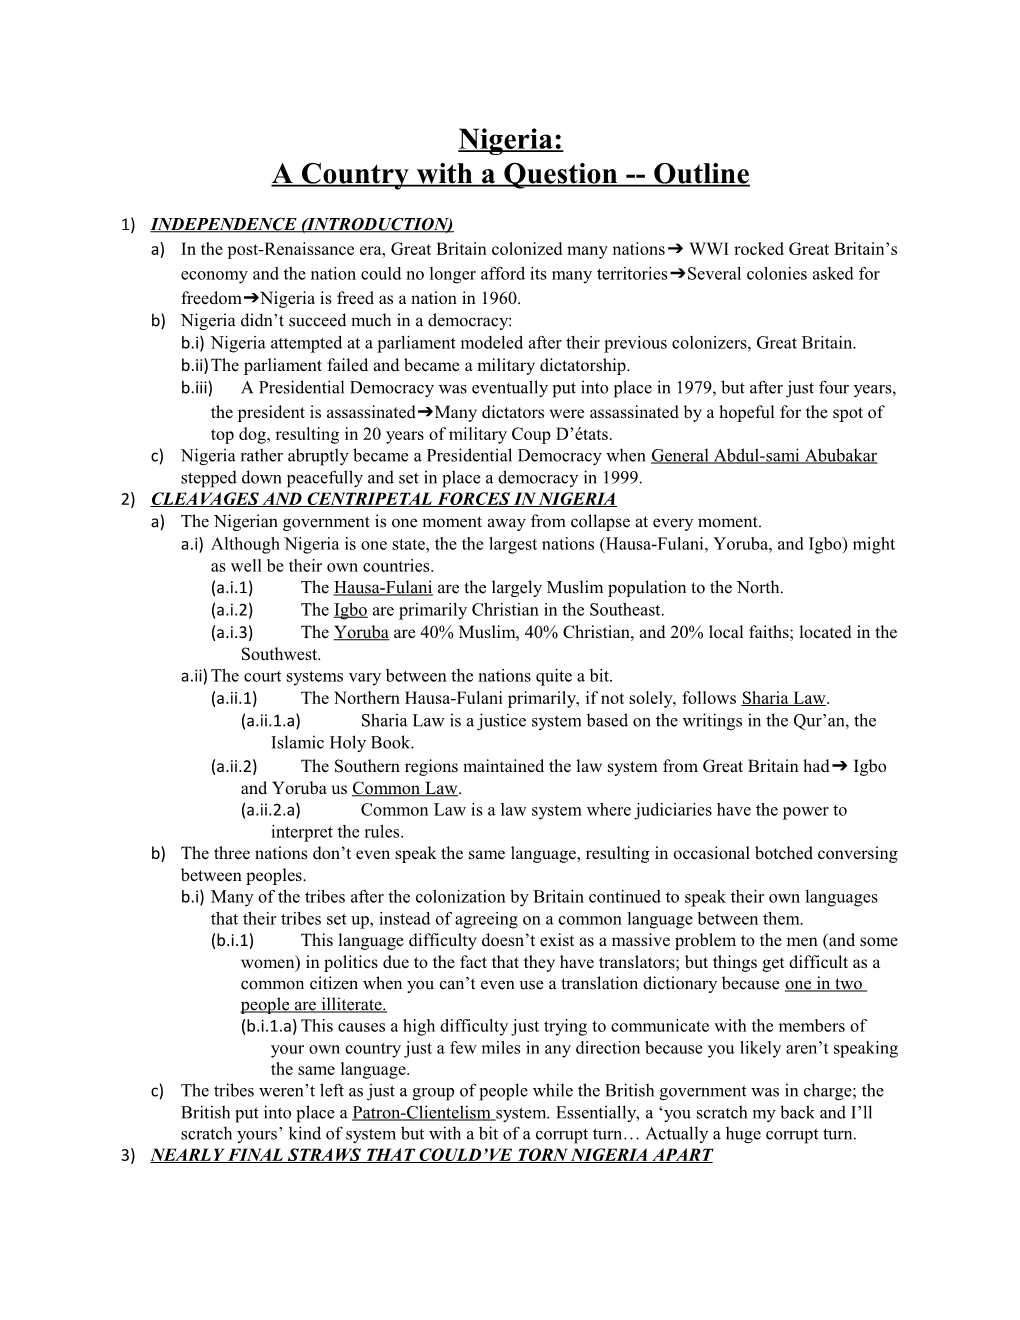 A Country with a Question Outline